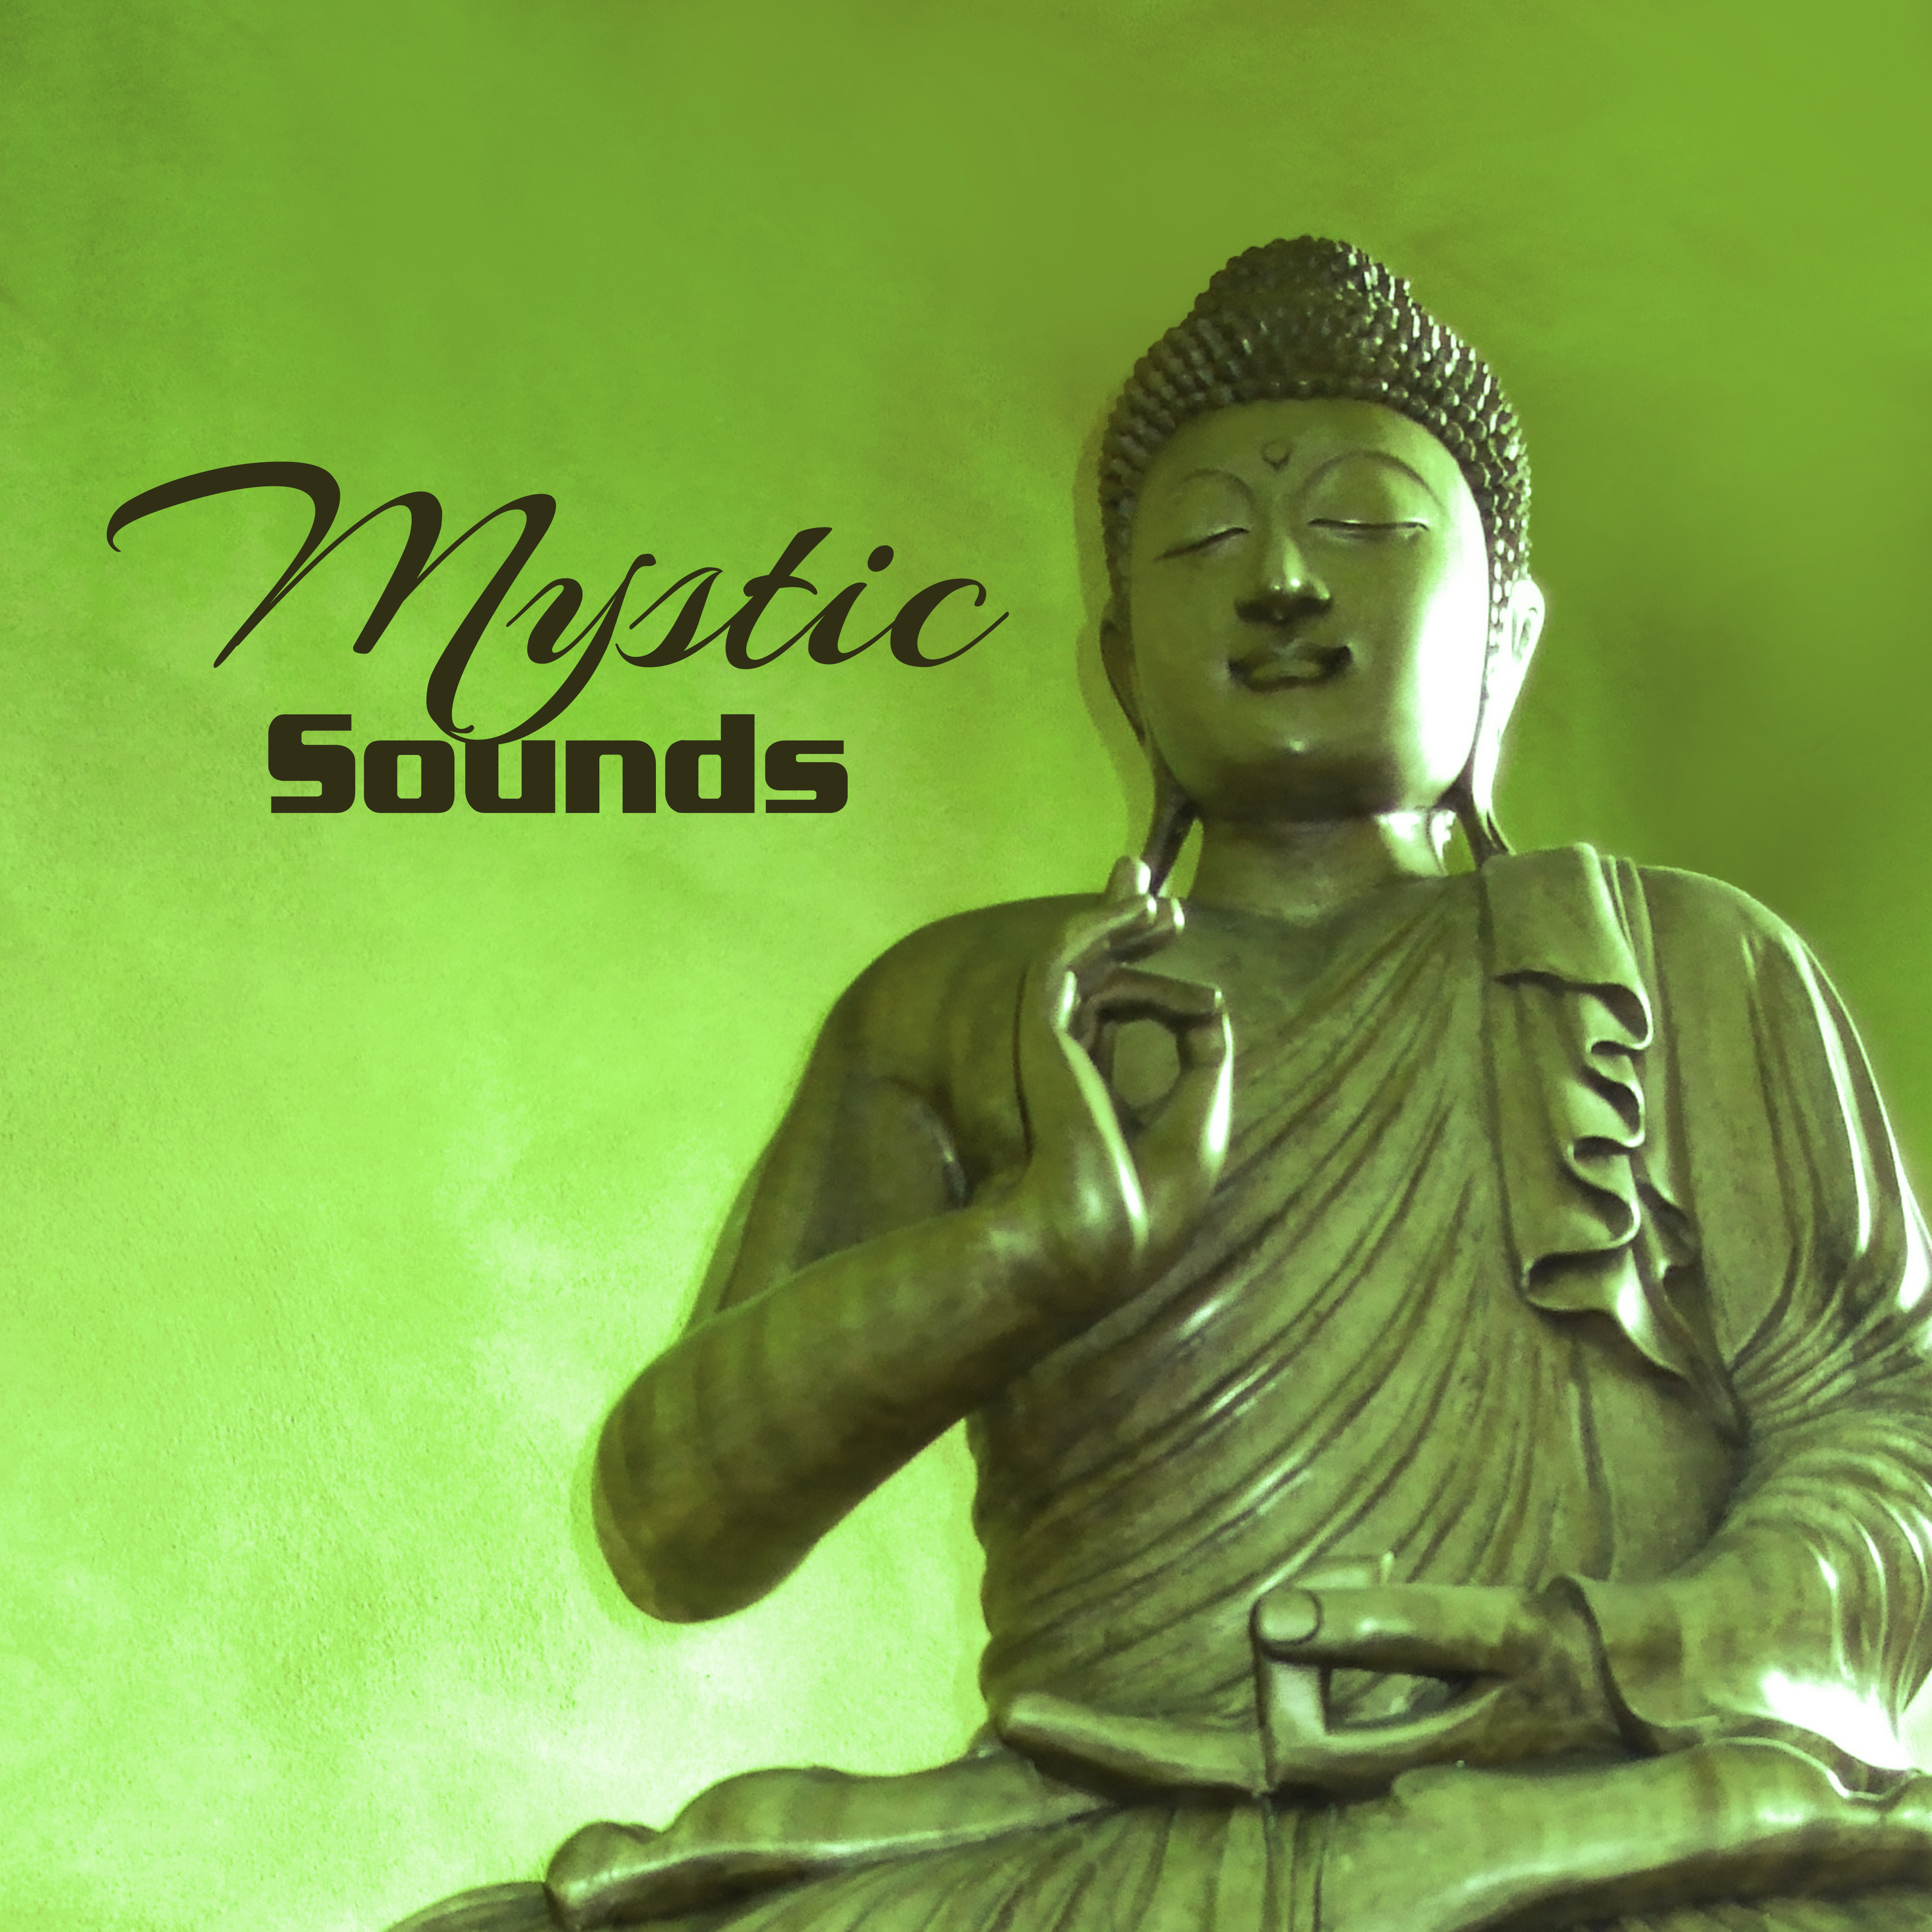 Mystic Sounds – Training Yoga, Soft Mindfulness, Relaxing Therapy for Mind, Deep Meditation, Music to Concentrate, Reiki Energy, Kundalini, Nature Sounds